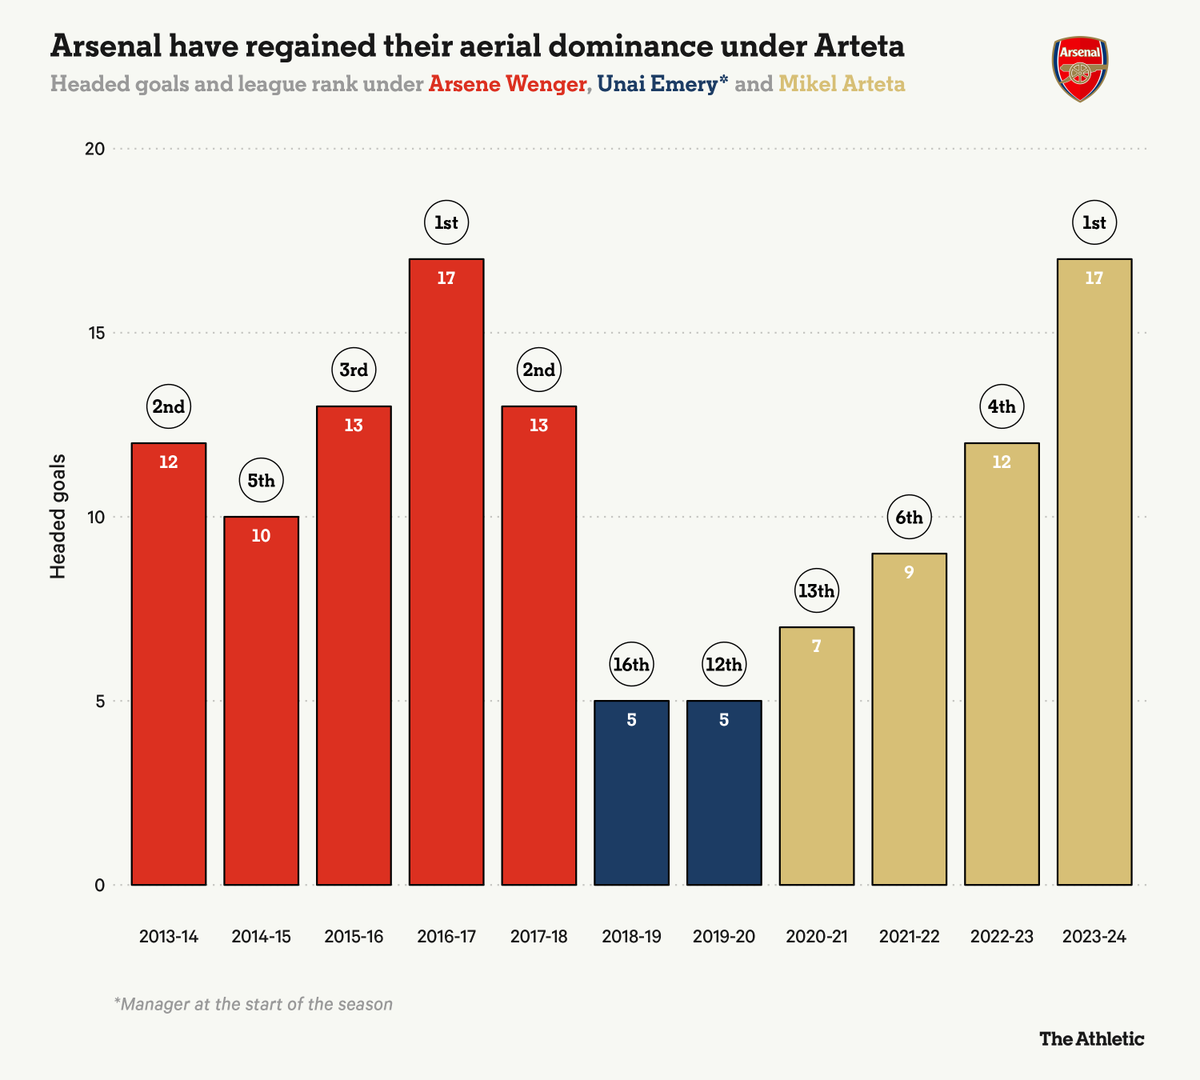 Graphic from @MarkCarey93 showing how Arsenal have fared with headed goals over the past 10 season Regularly ranked in the PL's top five in the late Arsene Wenger years, lost their dominance under Unai Emery and have been on a steady incline since Mikel Arteta took charge